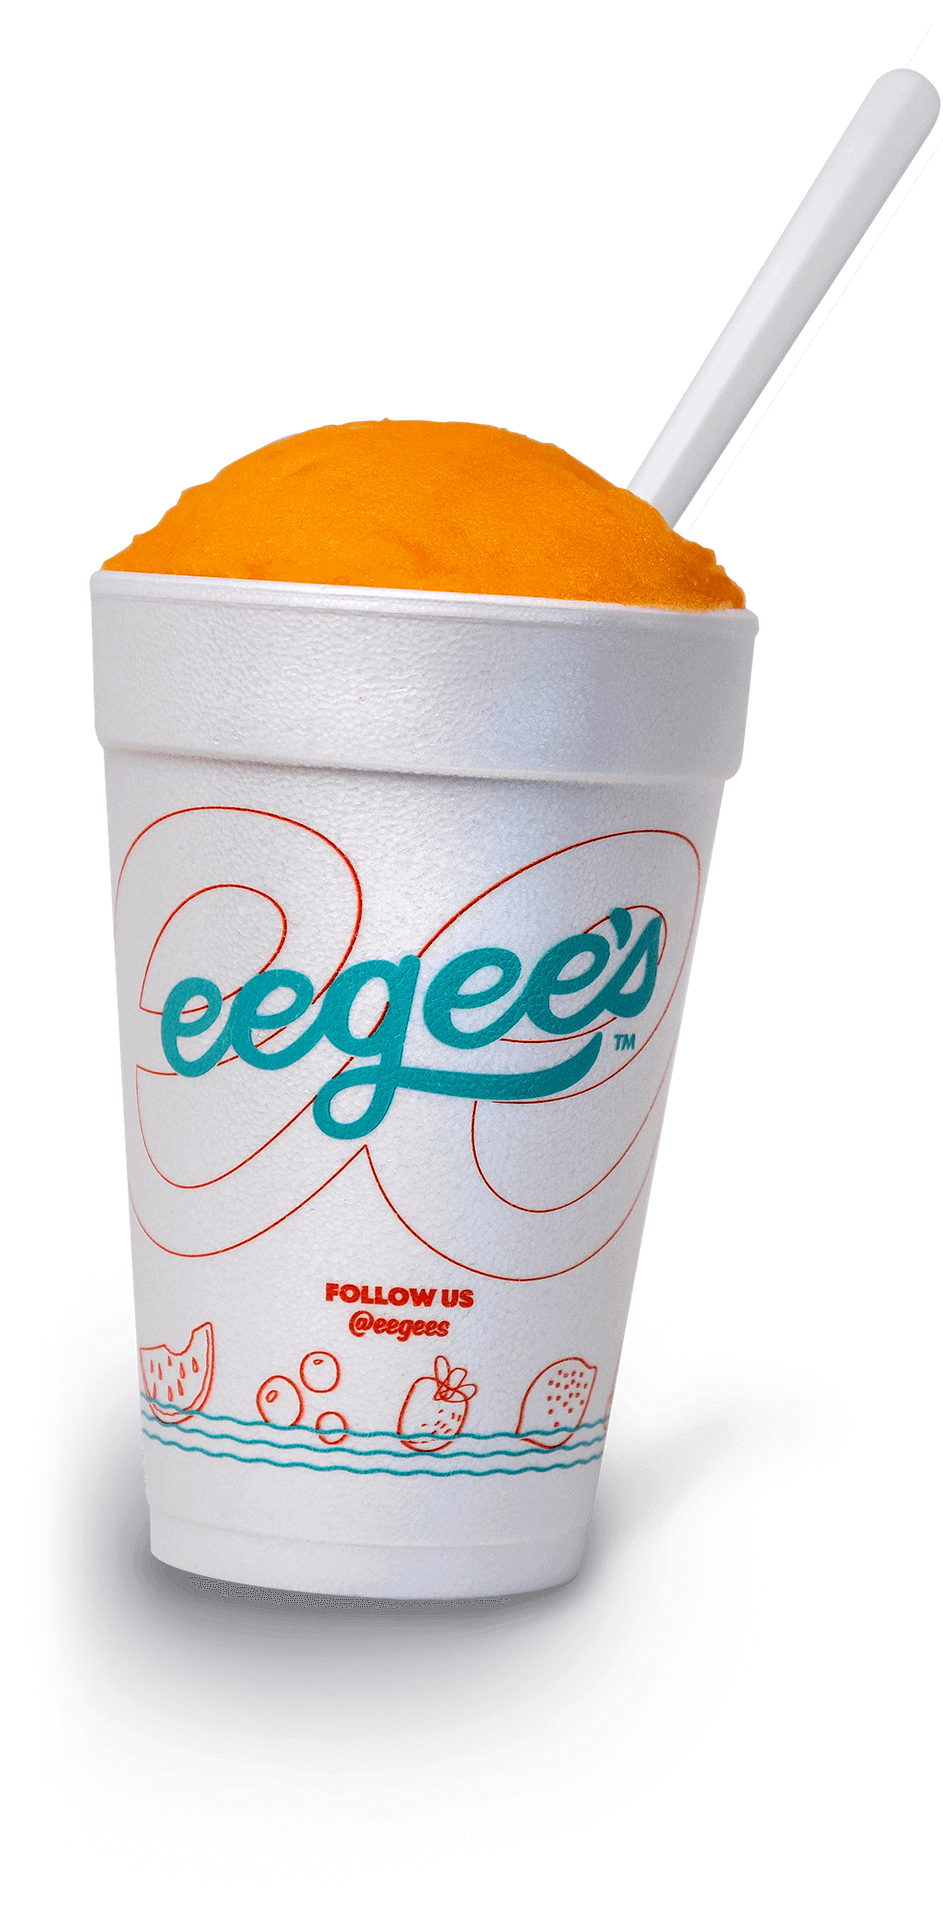 Cup with an eegee's logo